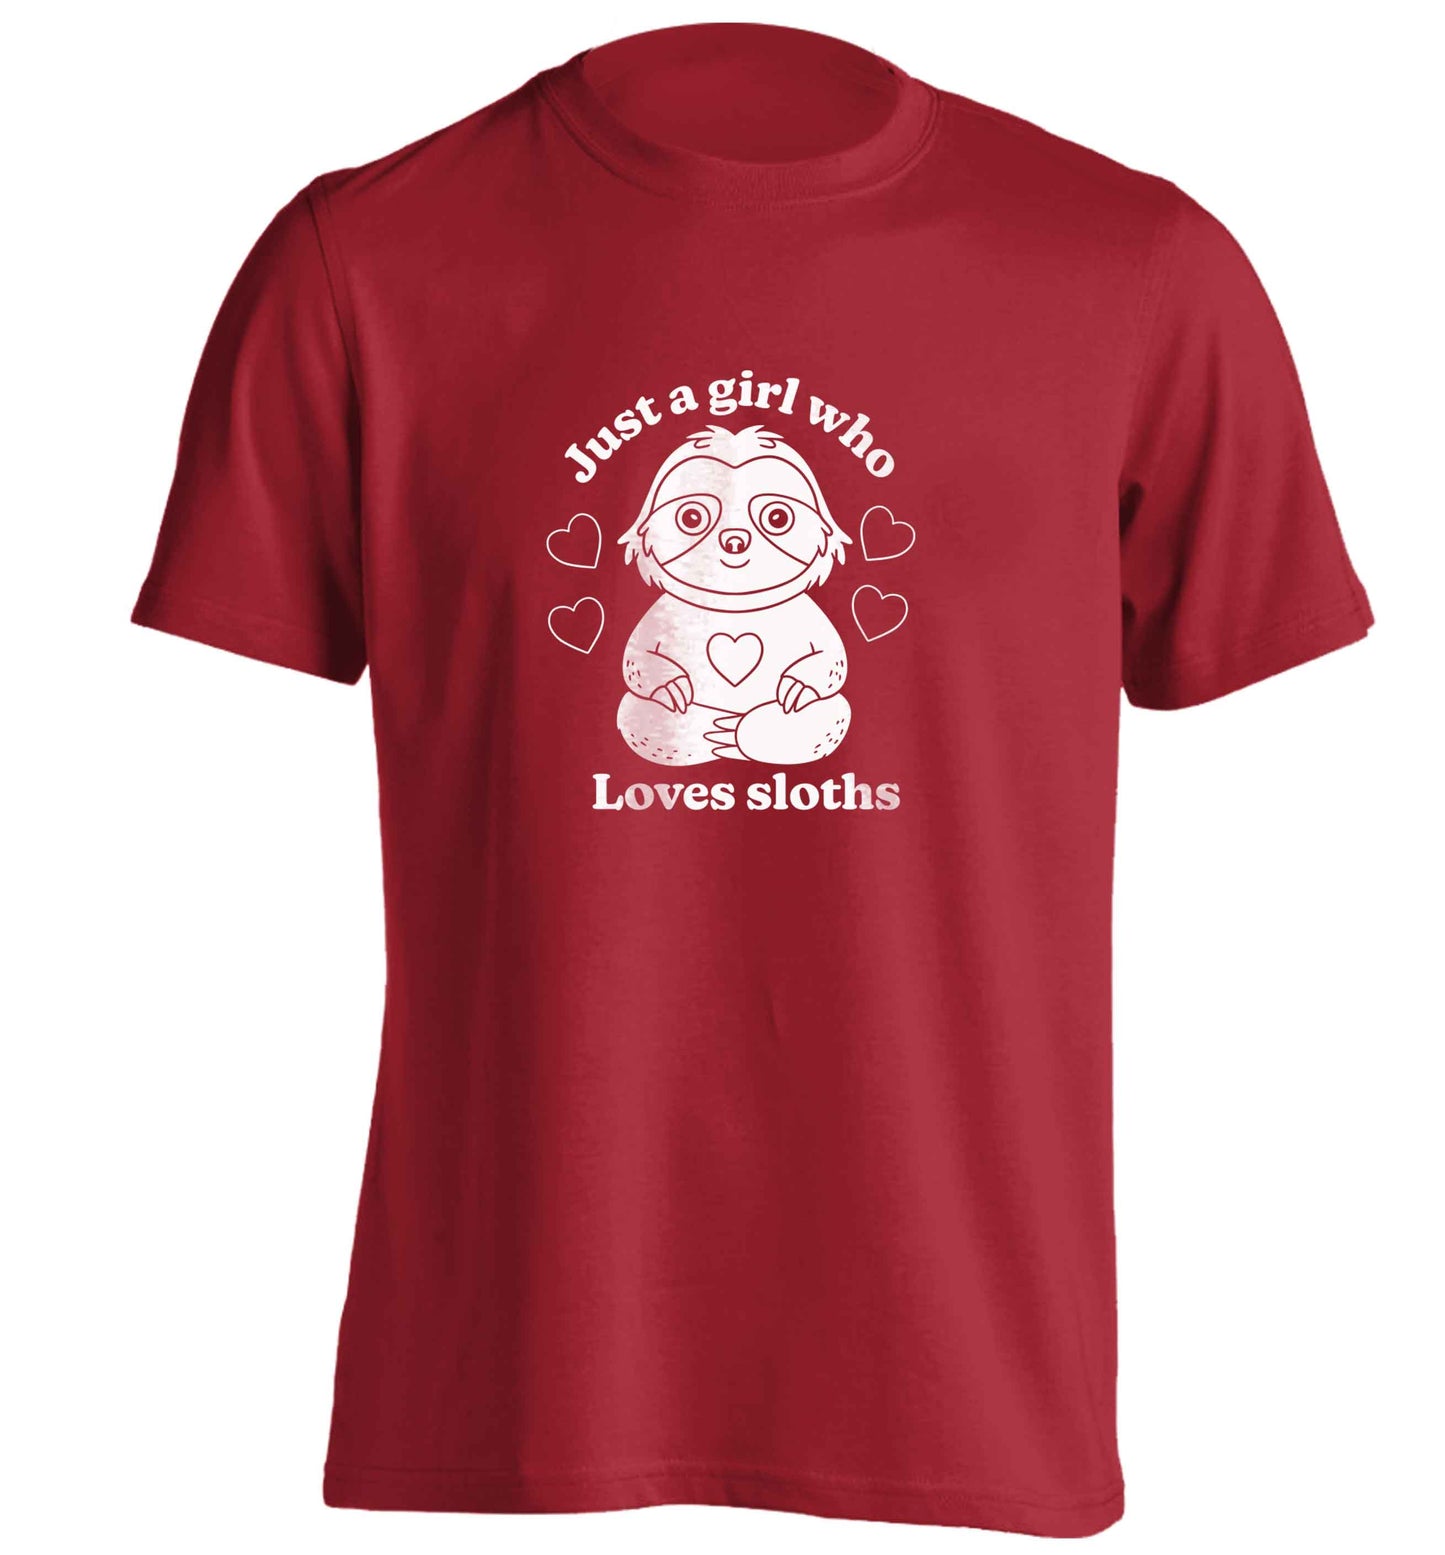 Just a girl who loves sloths adults unisex red Tshirt 2XL